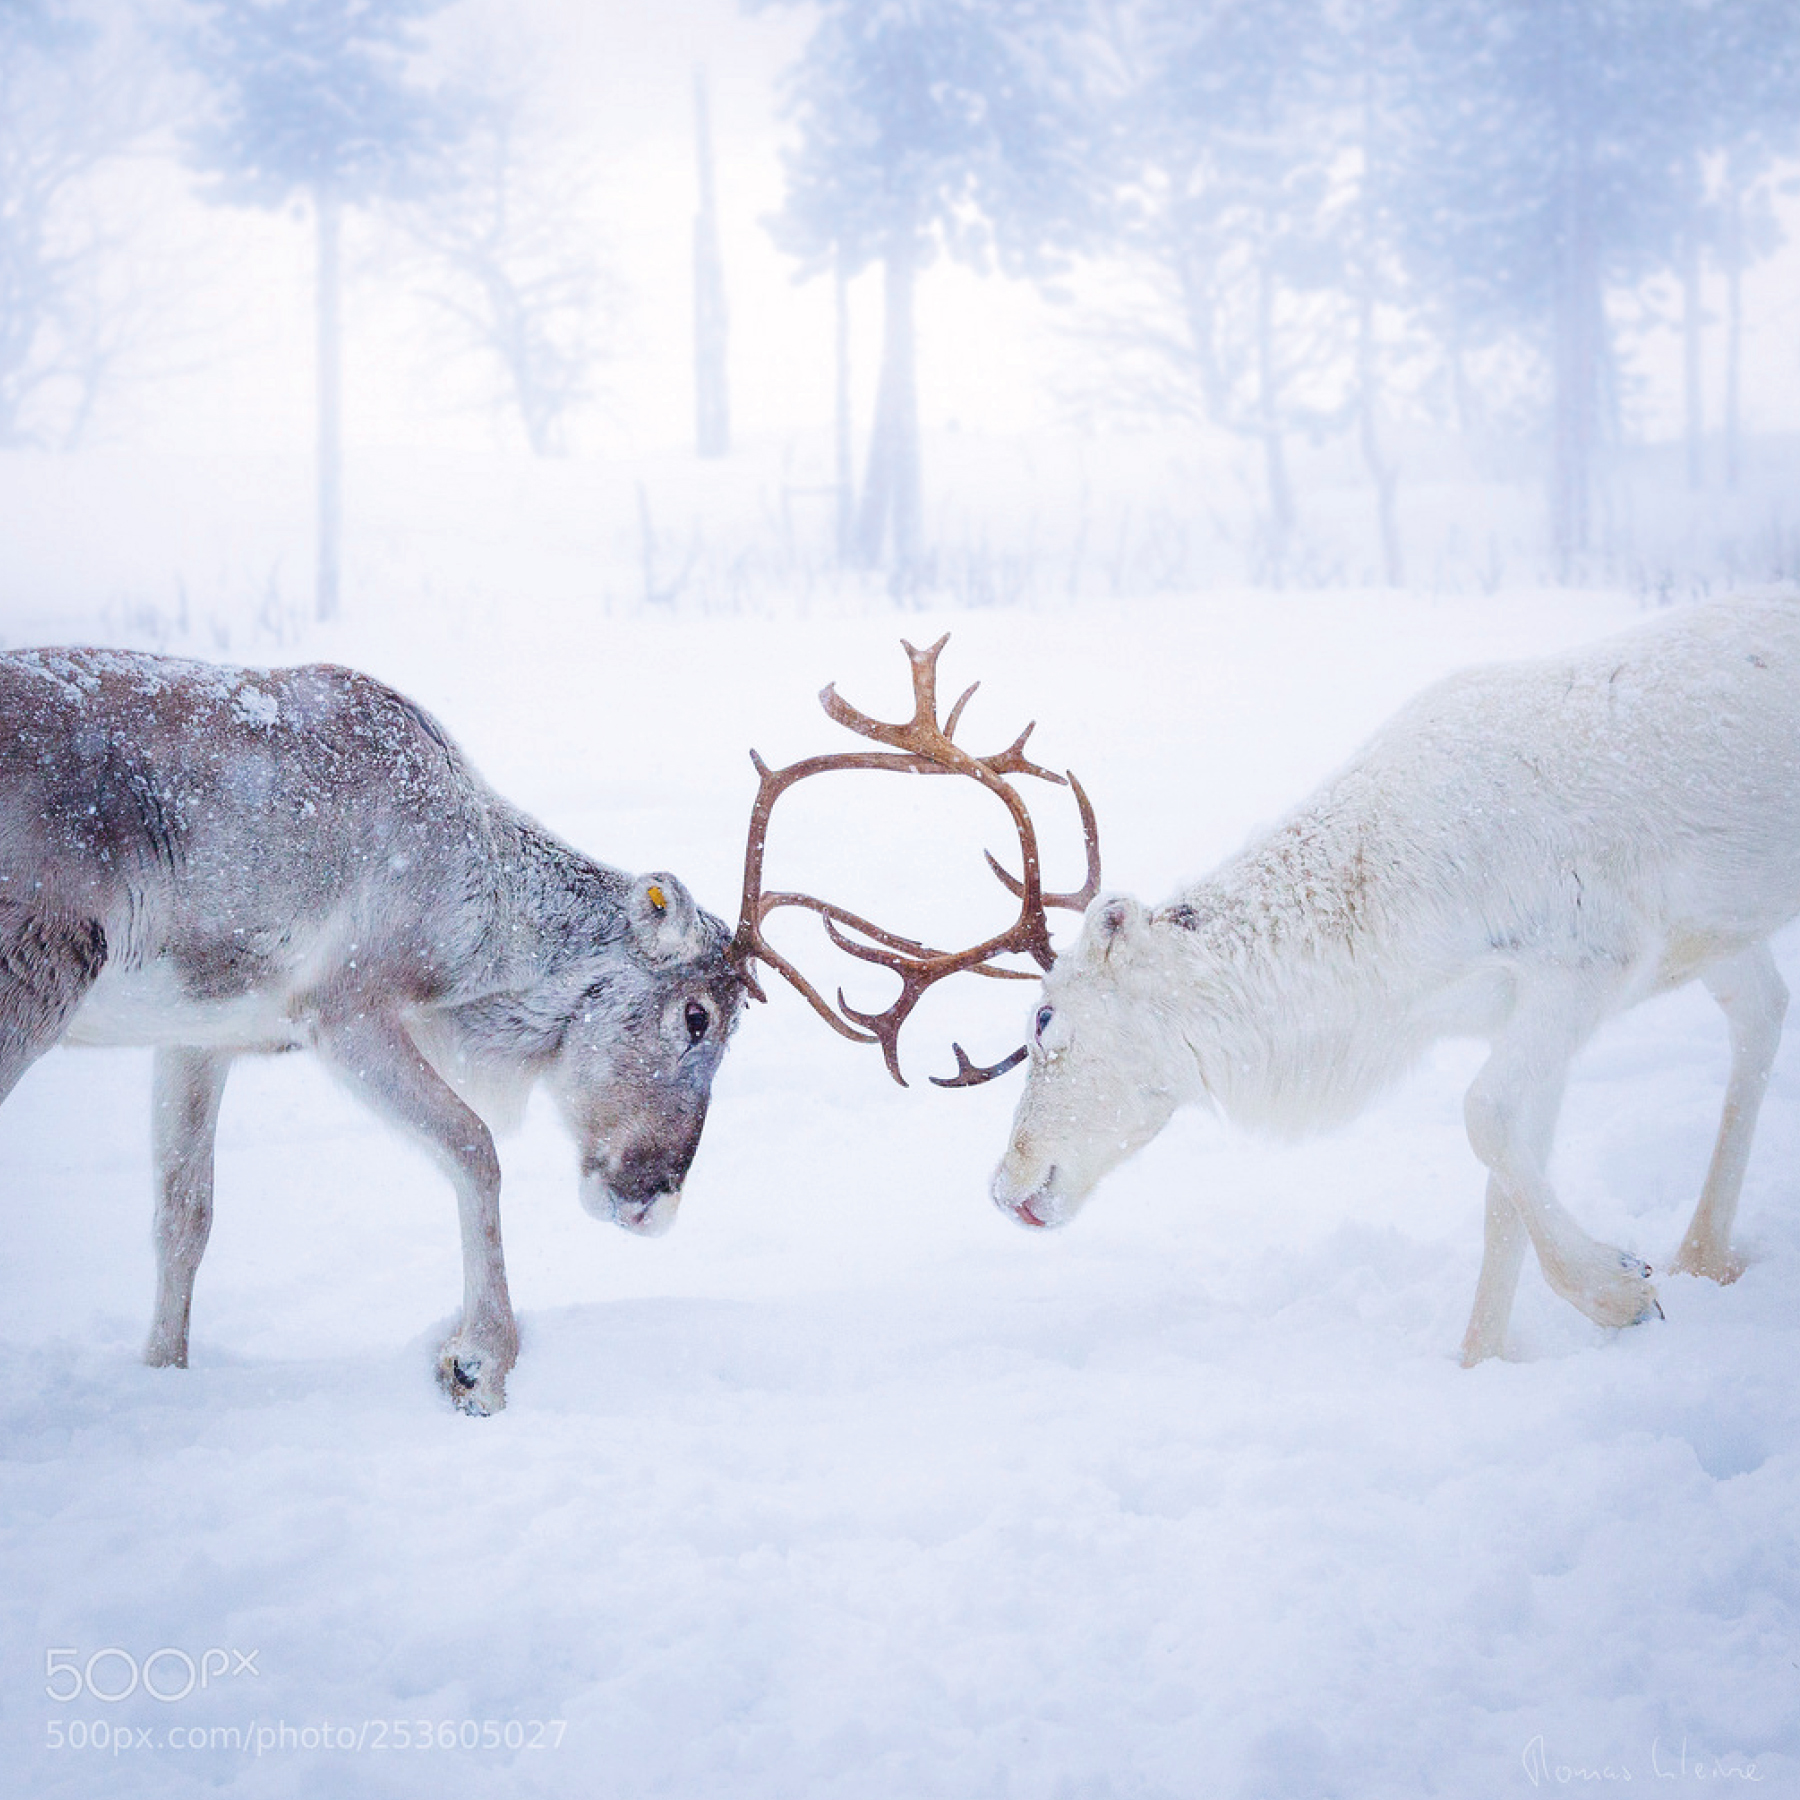  This image was taken a few miles east of Nellim in Finish Lapland in rather harsh weather. We met these two reindeers in mystic light during an excursion with snowmobiles near the Russian border. Thomas is living in Germany near Hamburg and in Swede